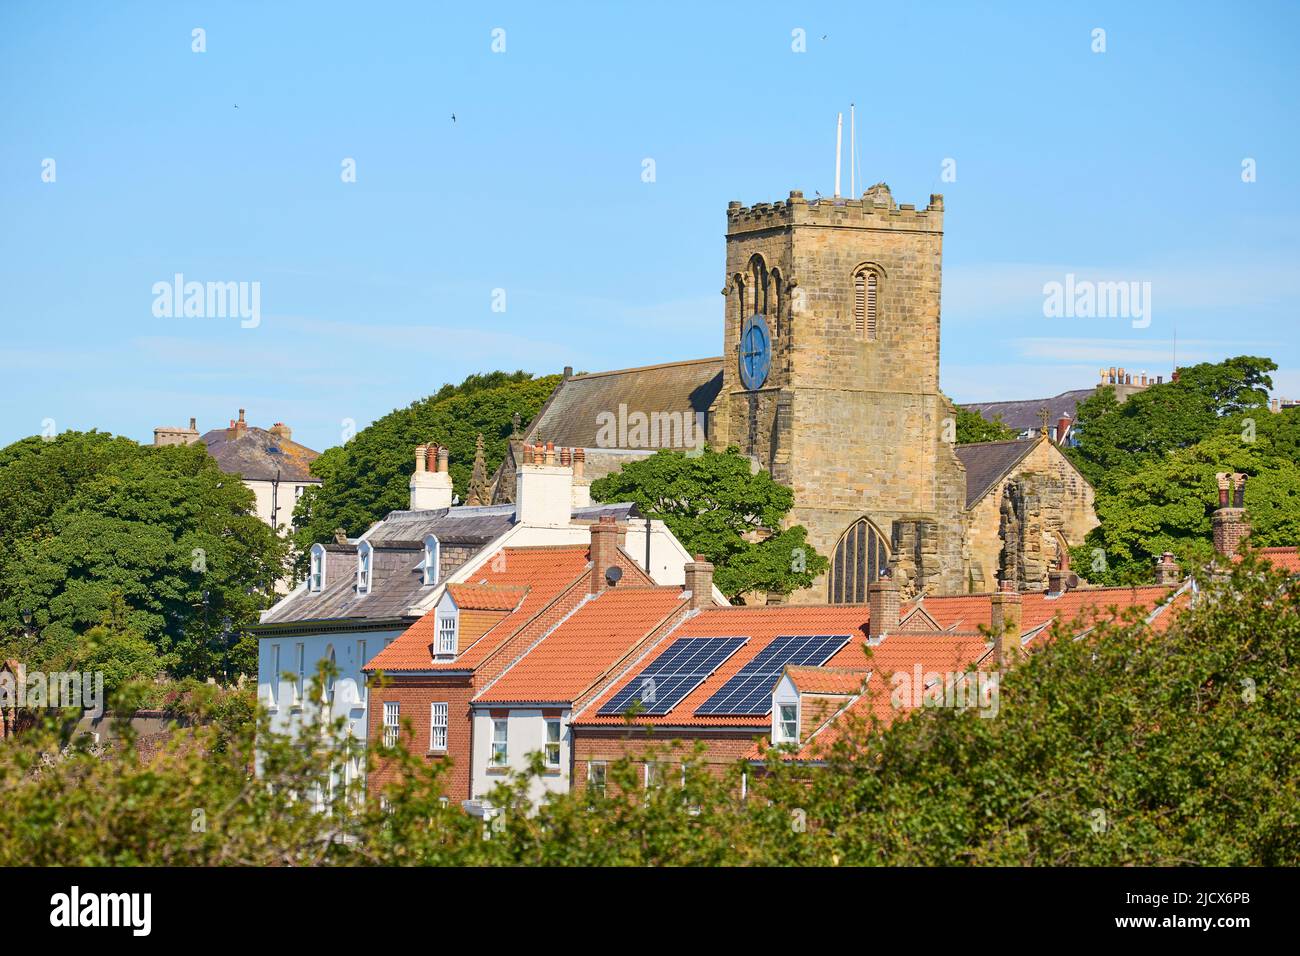 View of St. Mary's Church, Scarborough, Yorkshire, England, United Kingdom, Europe Stock Photo